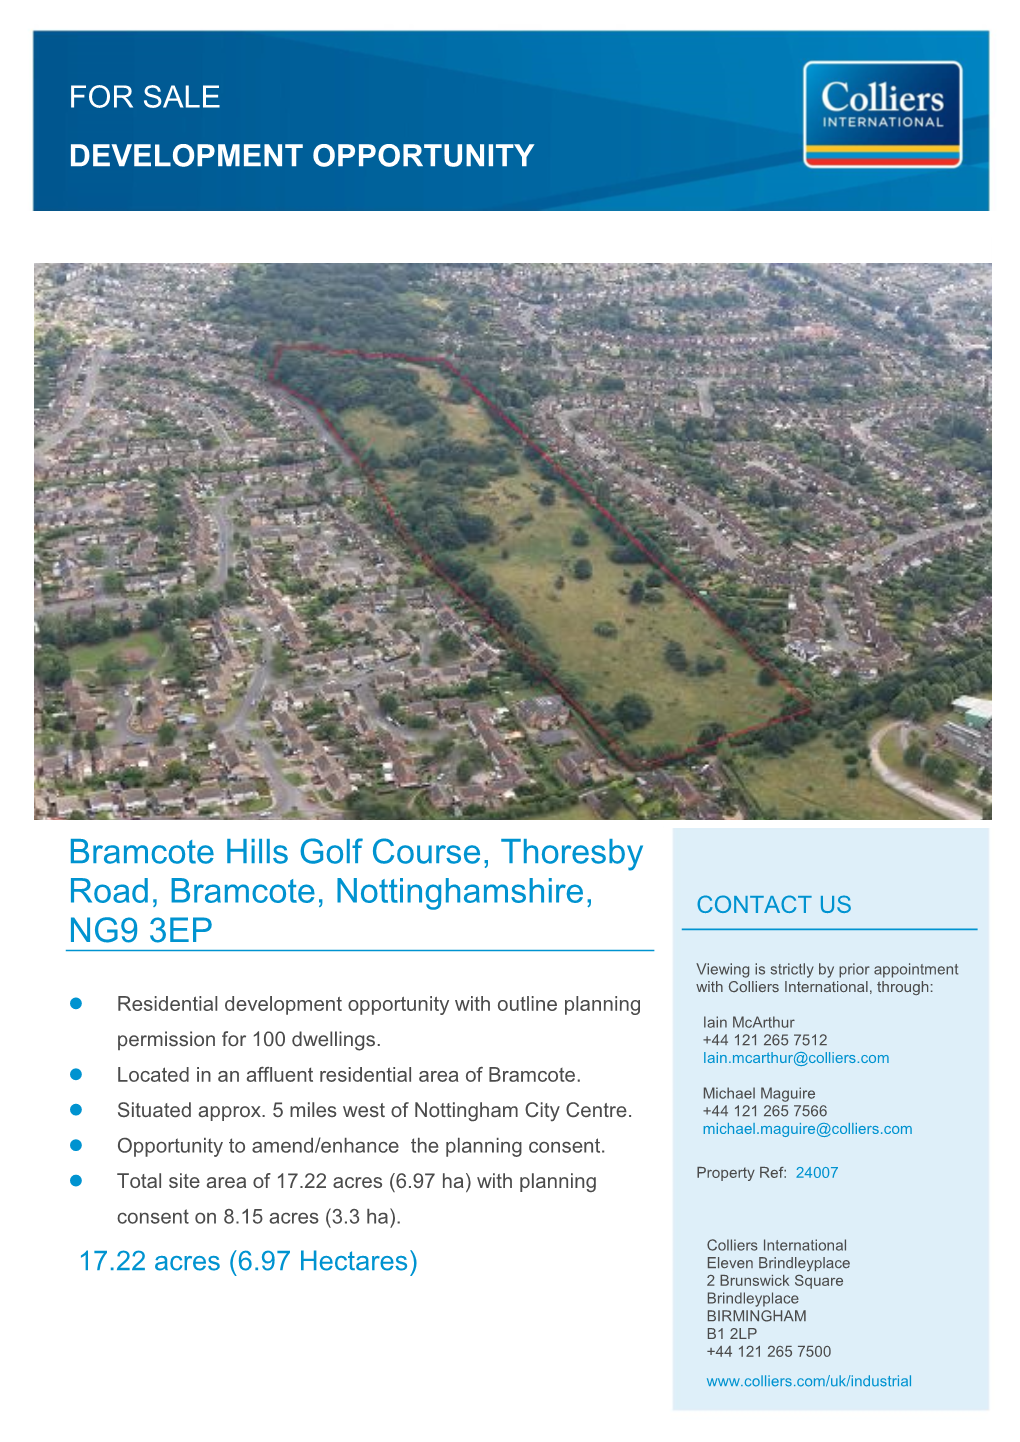 Bramcote Hills Golf Course, Thoresby Road, Bramcote, Nottinghamshire, CONTACT US NG9 3EP